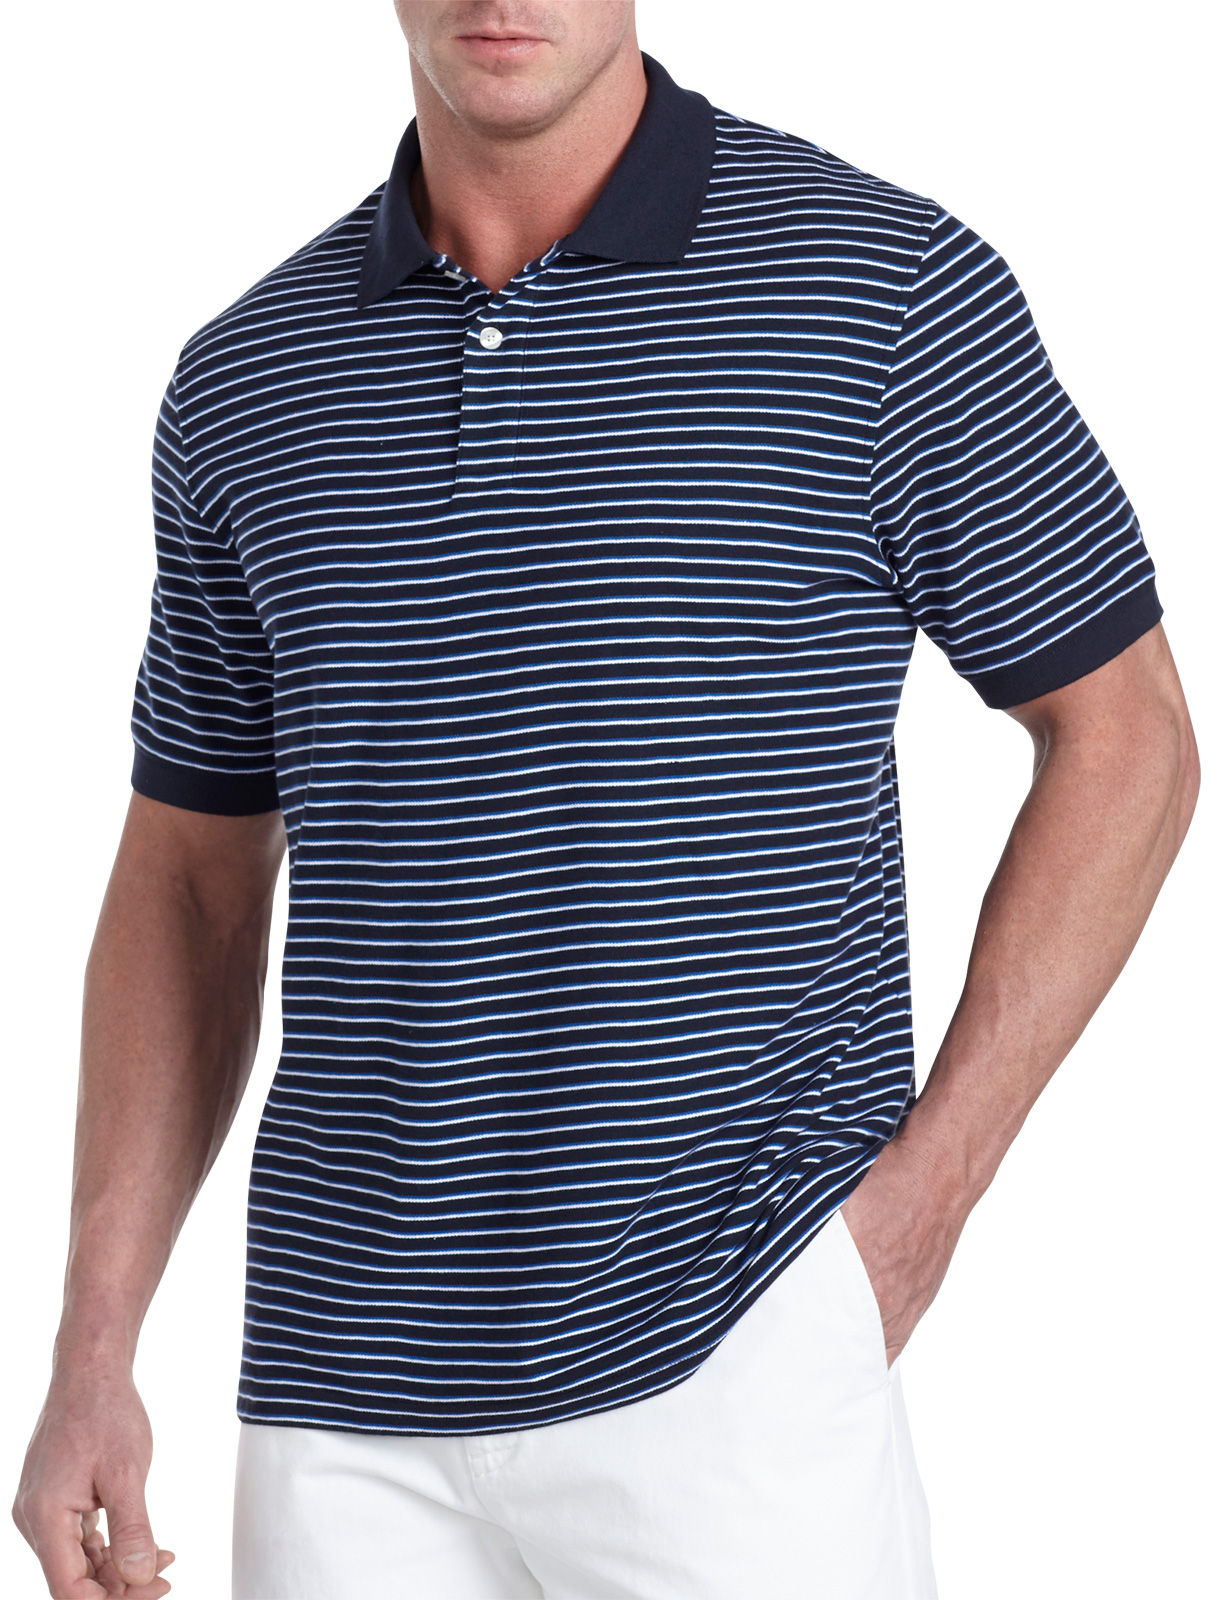 Harbor Bay Men's Big and Tall Double-Stripe Polo